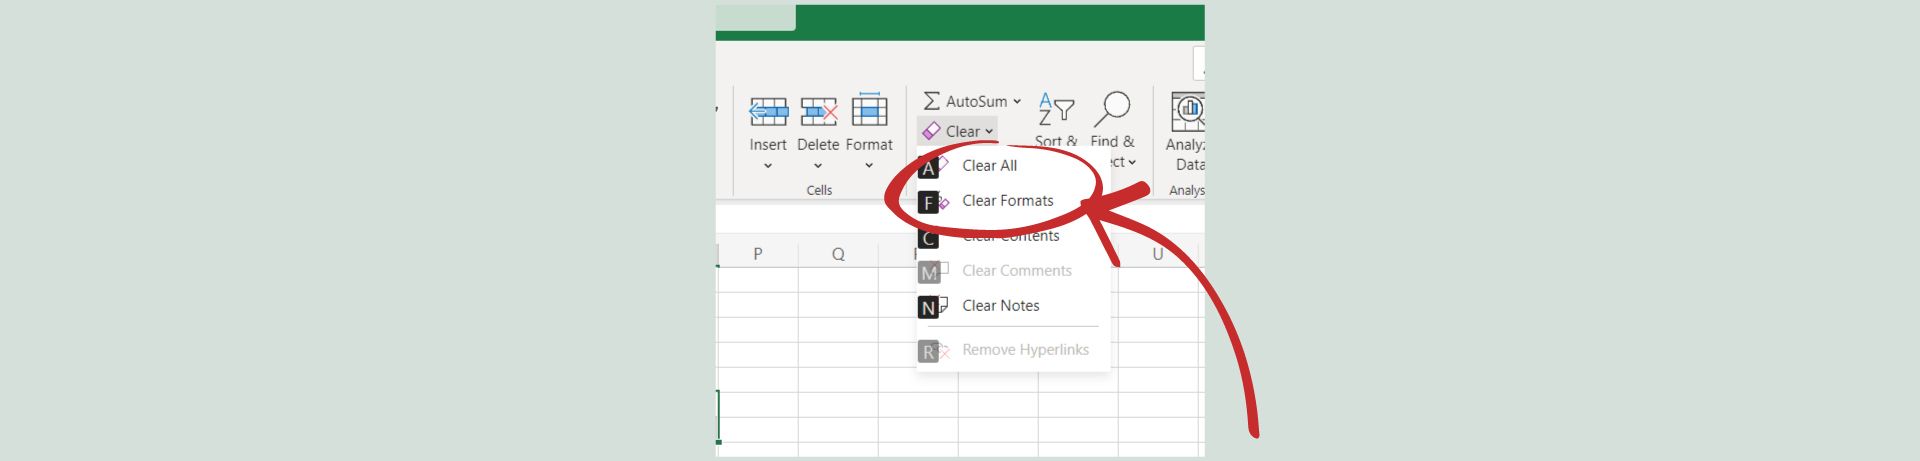 Excel screenshot of clear formats command